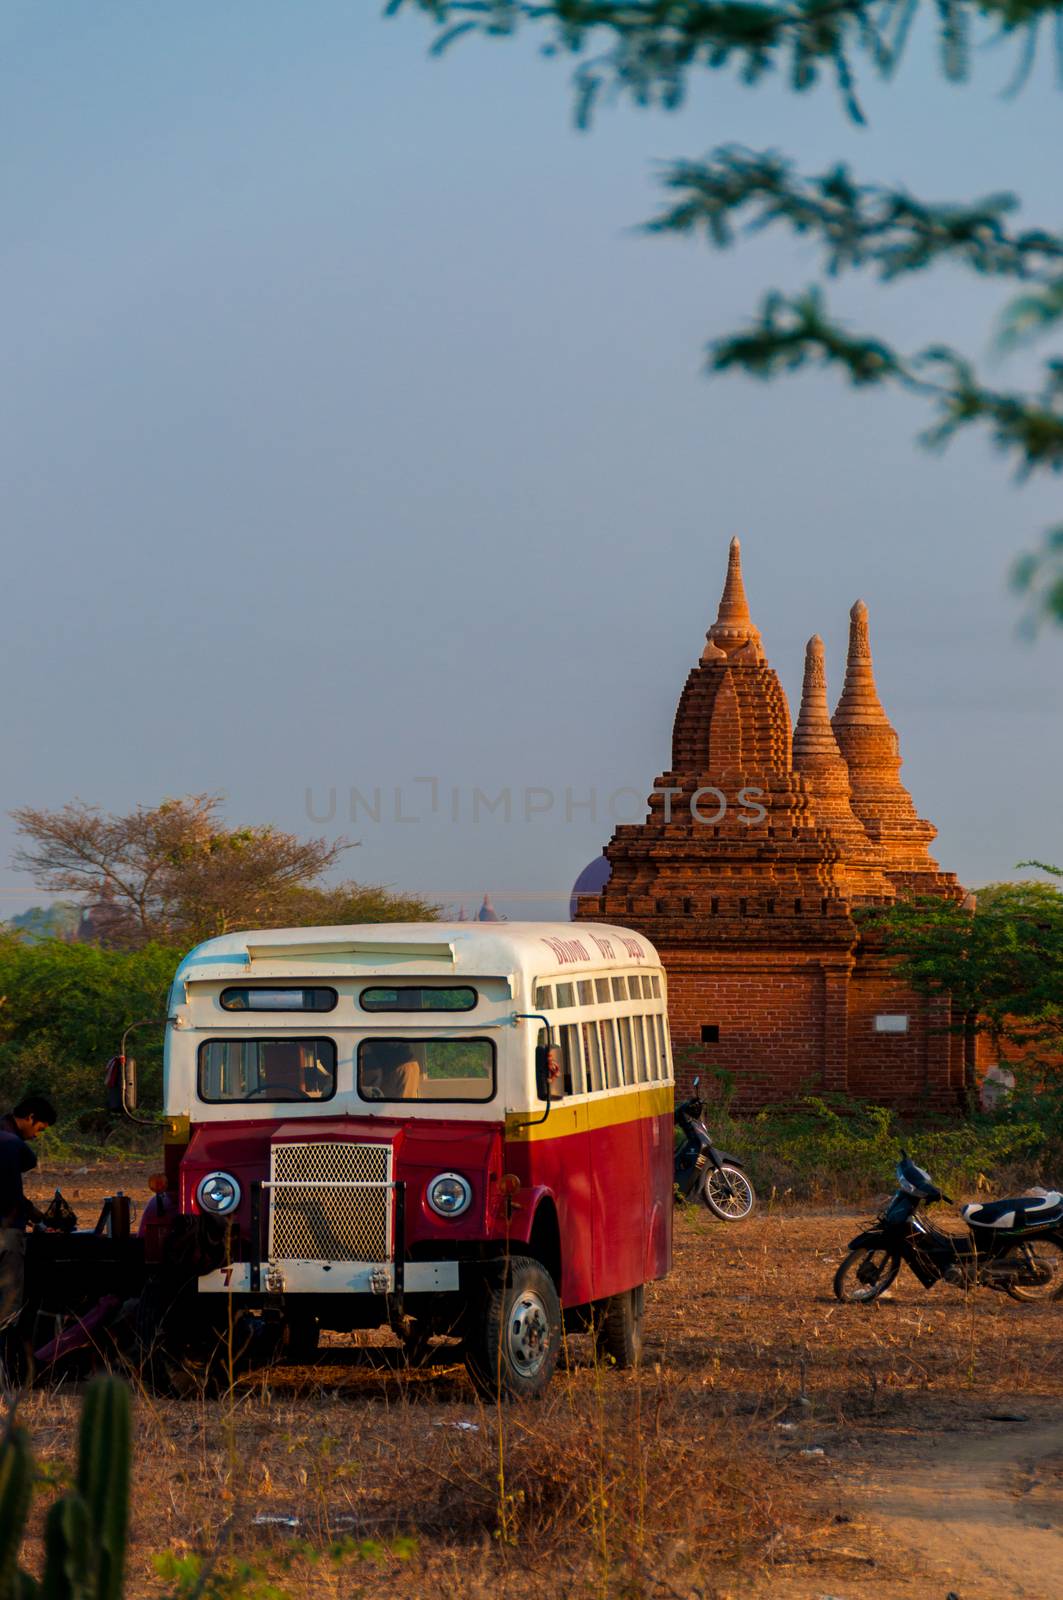 Bus and Pagoda Stupa in Bagan by attiarndt